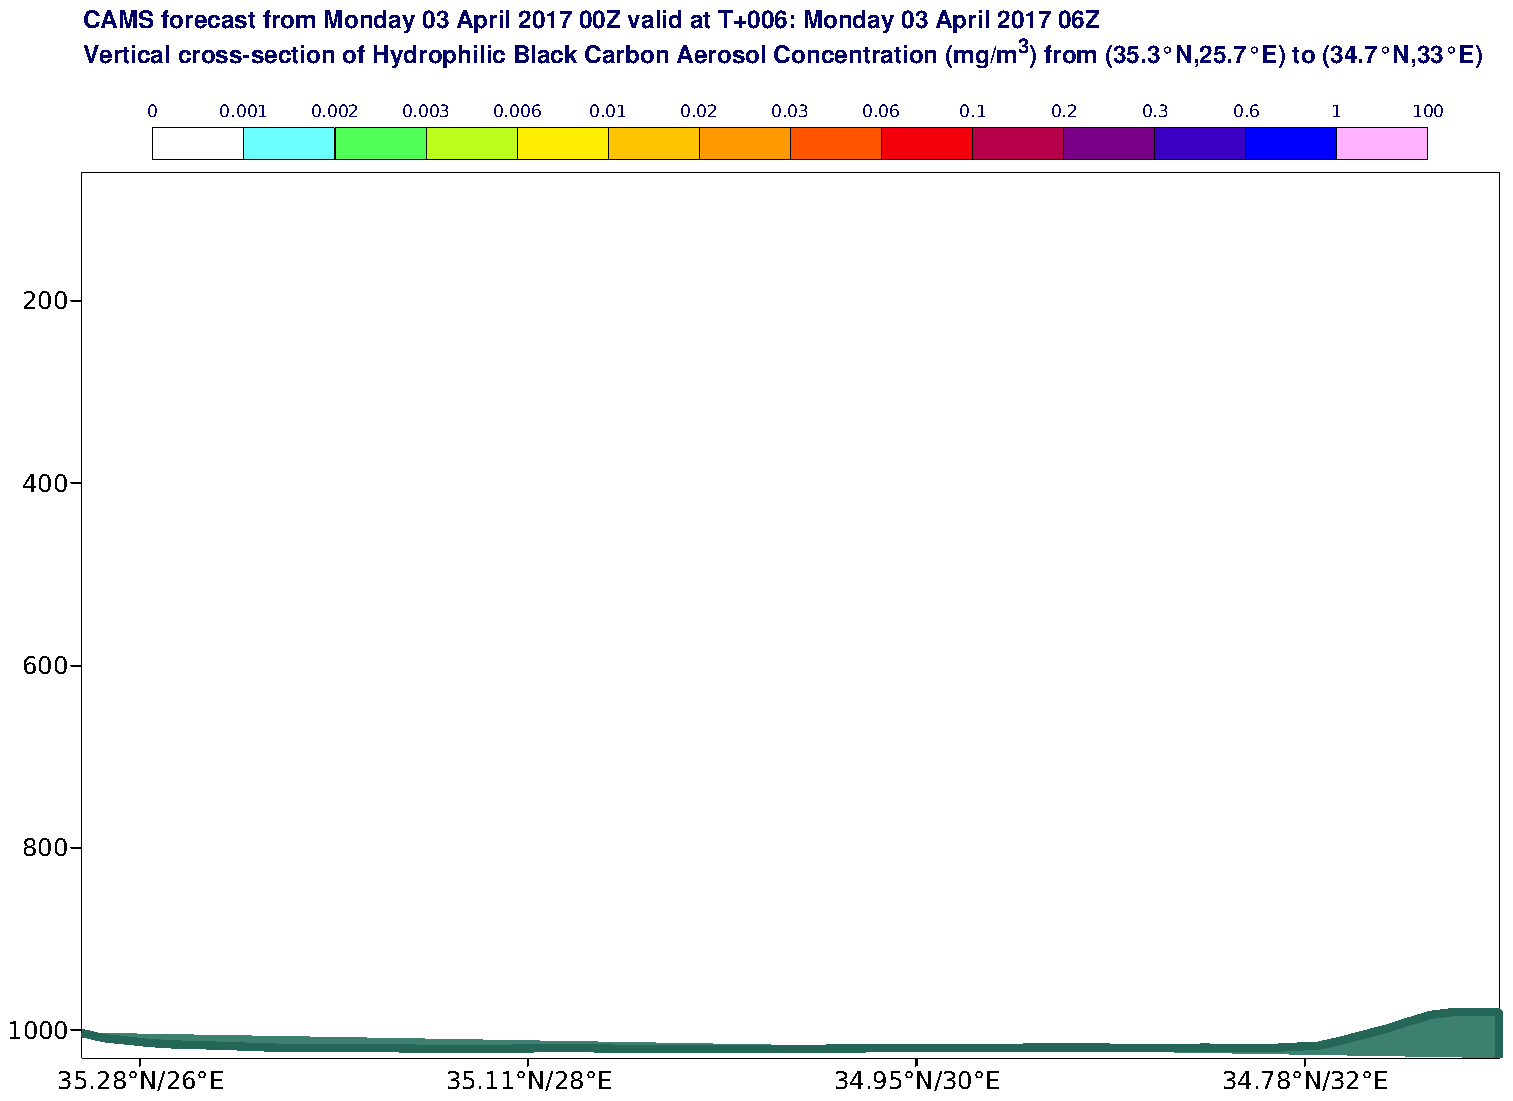 Vertical cross-section of Hydrophilic Black Carbon Aerosol Concentration (mg/m3) valid at T6 - 2017-04-03 06:00